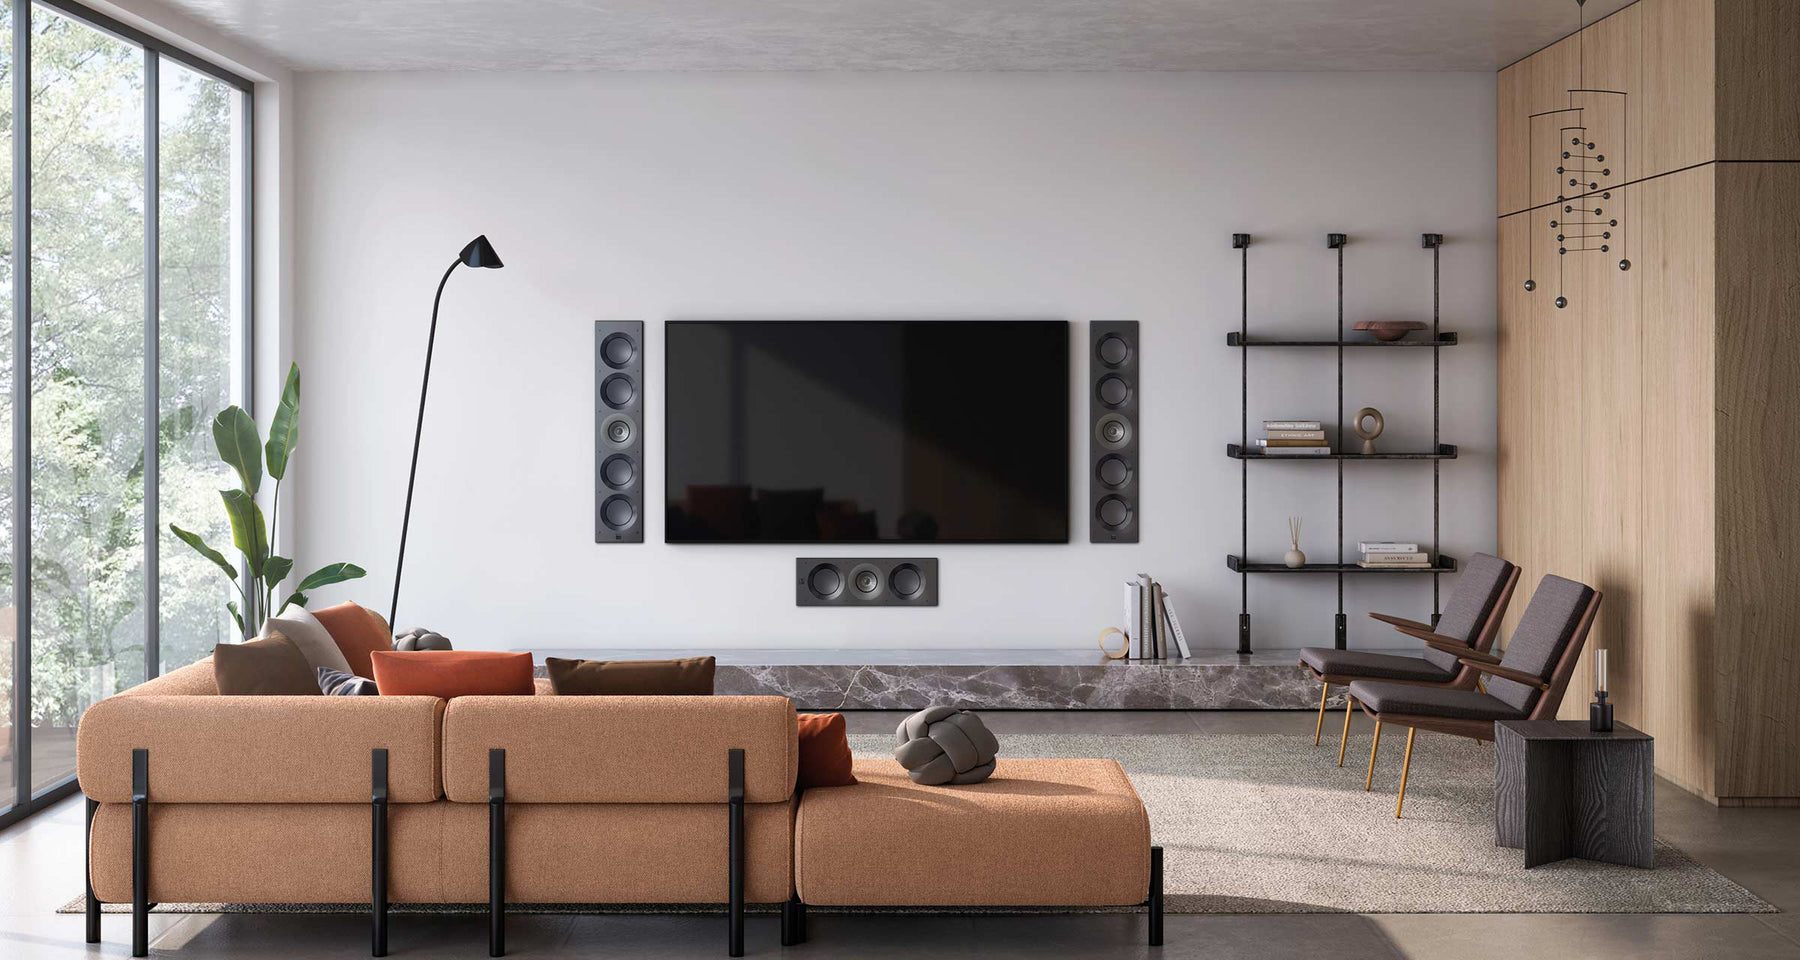 Unrivalled home cinematic experiences with KEF’s two new THX® Certified architectural speakers